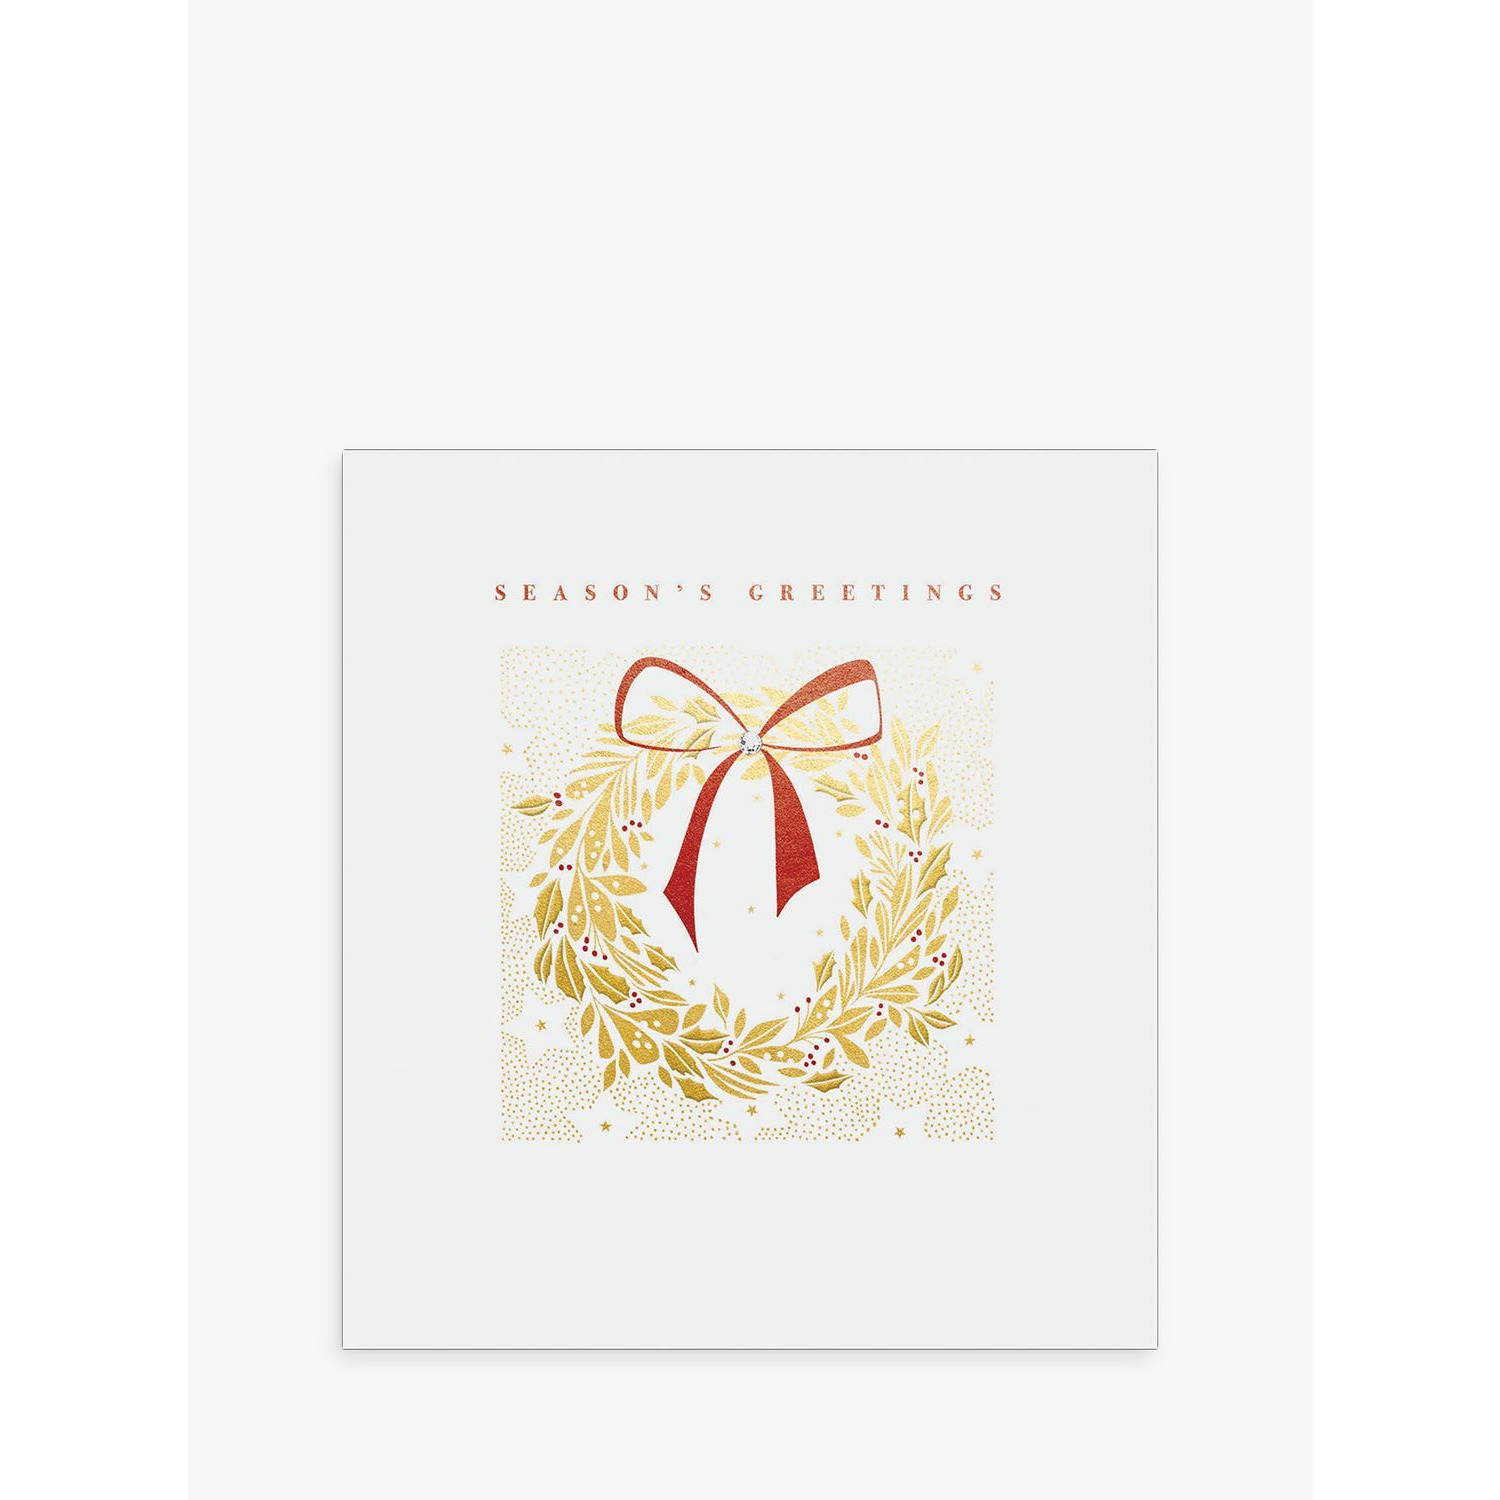 The Proper Mail Company Gold Christmas Wreath Christmas Card